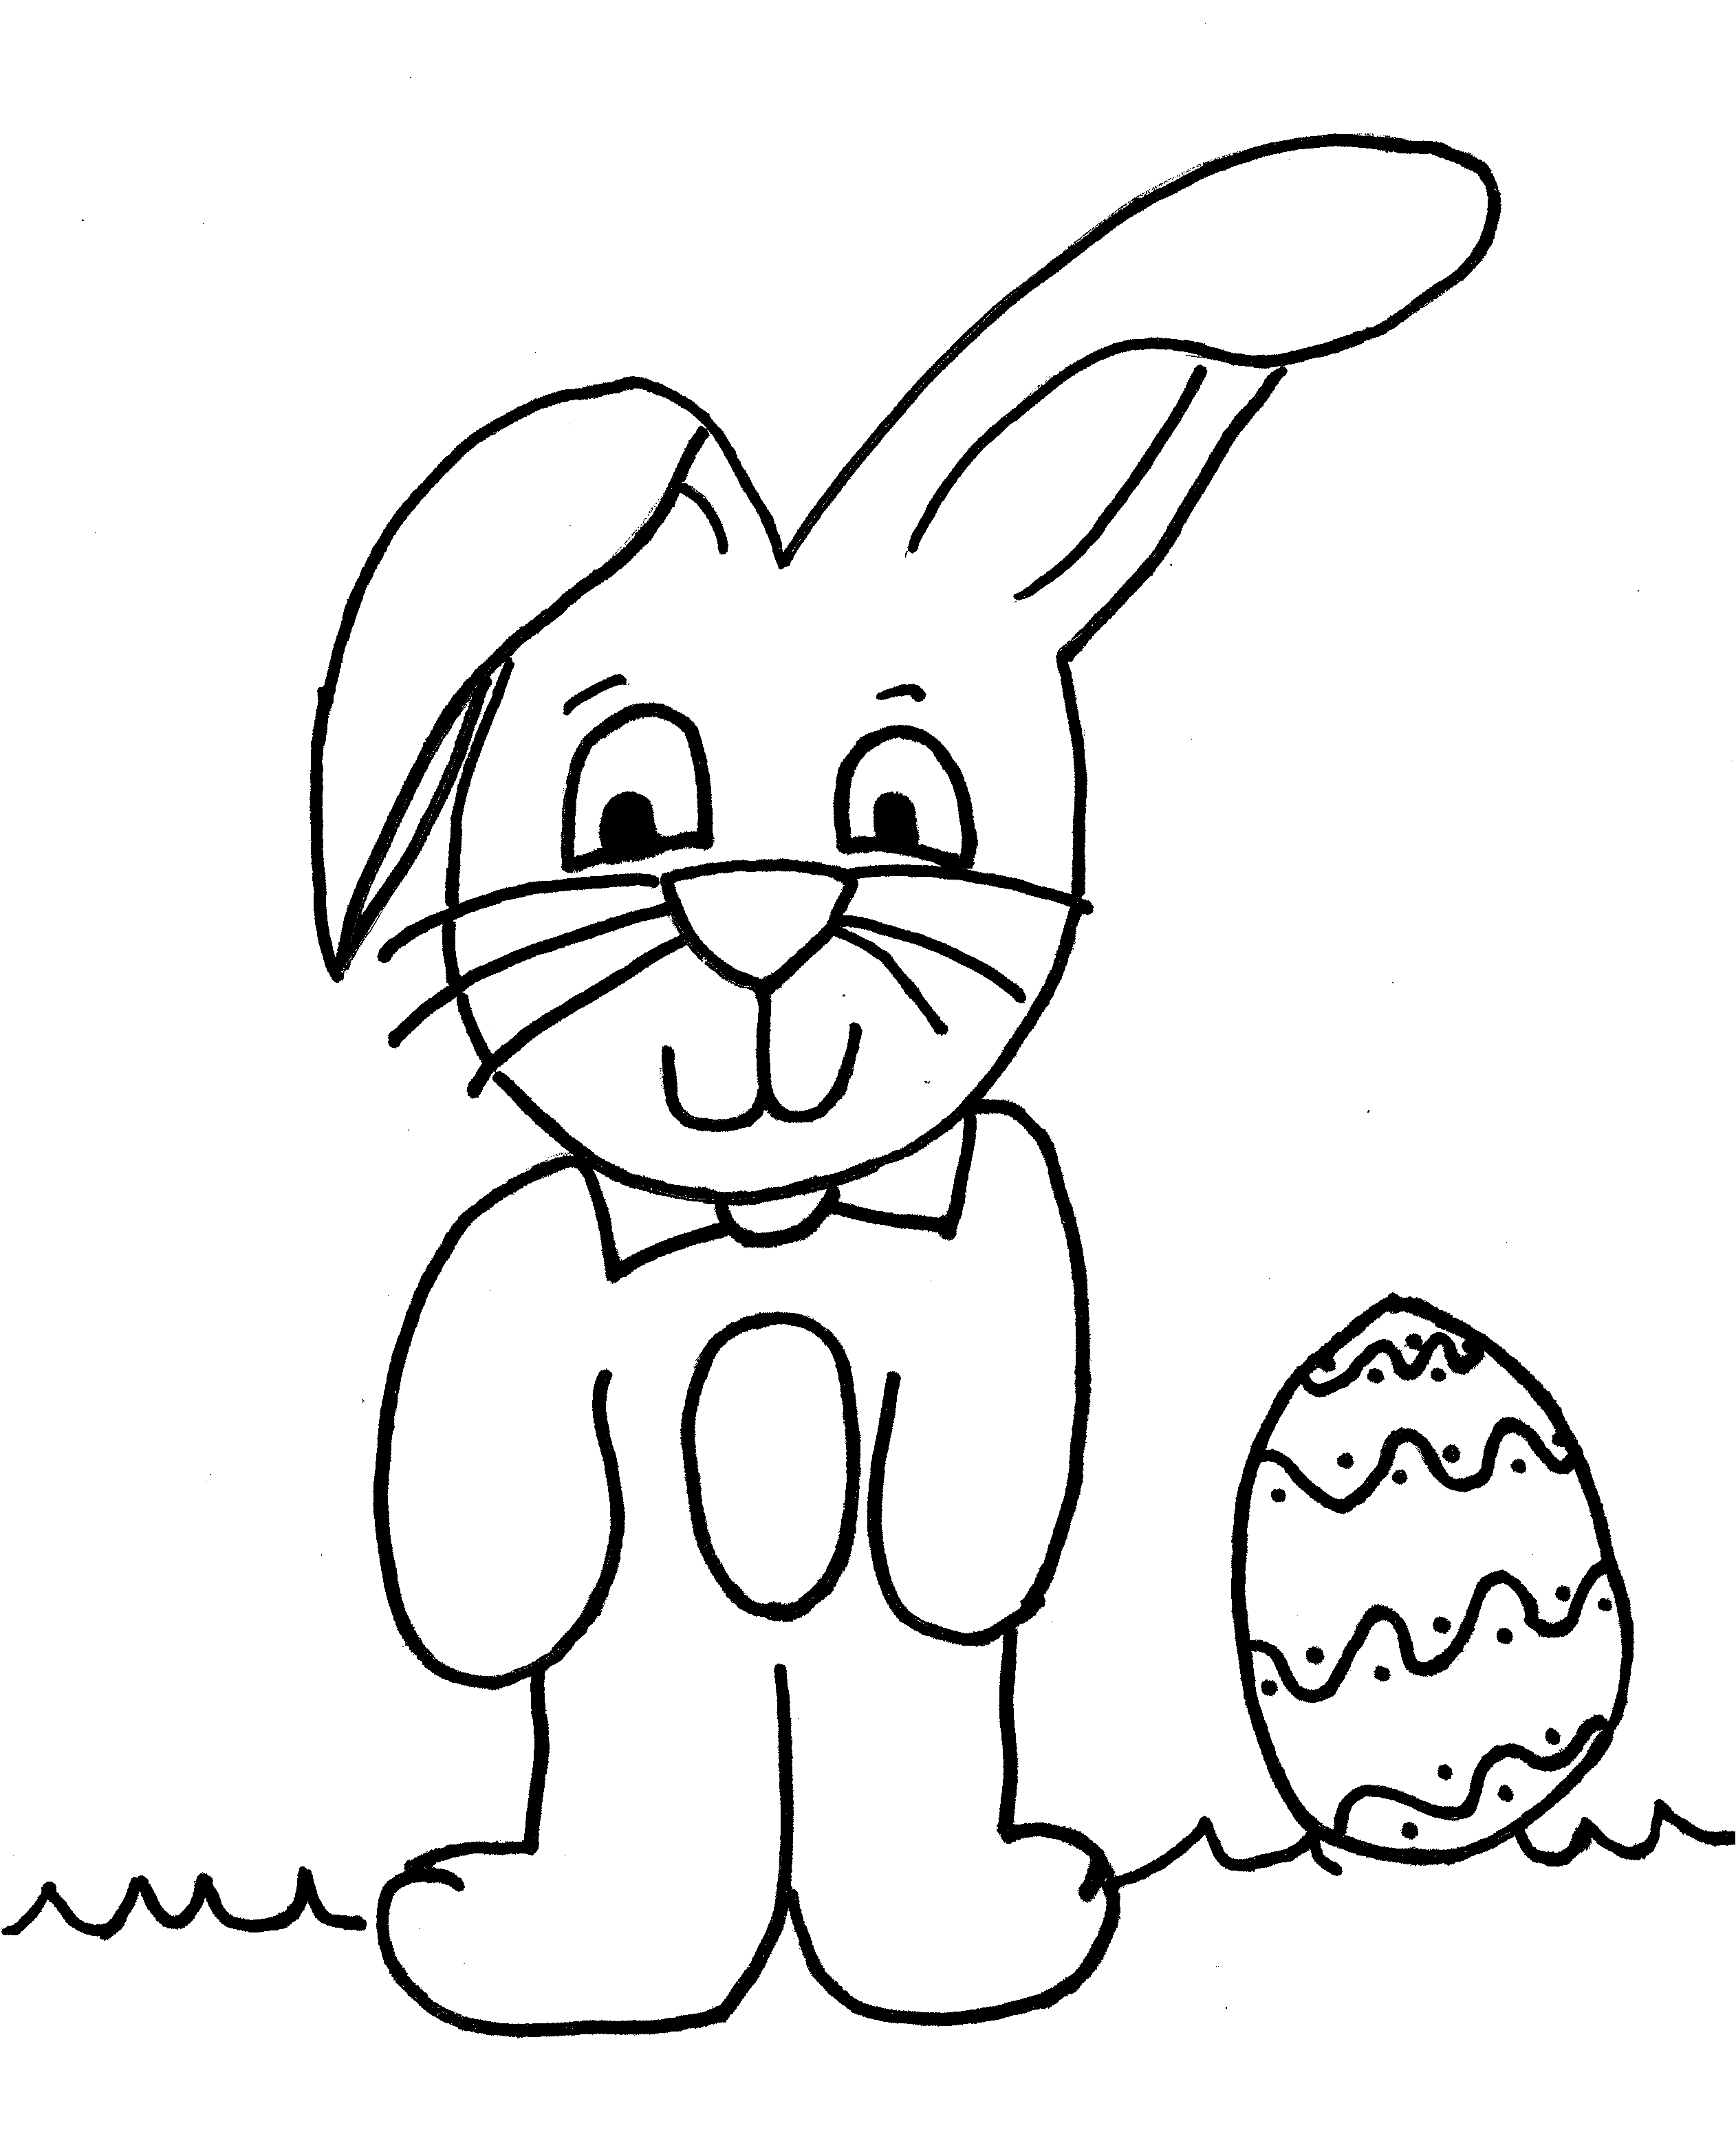 Free Easter coloring page - bunny and egg